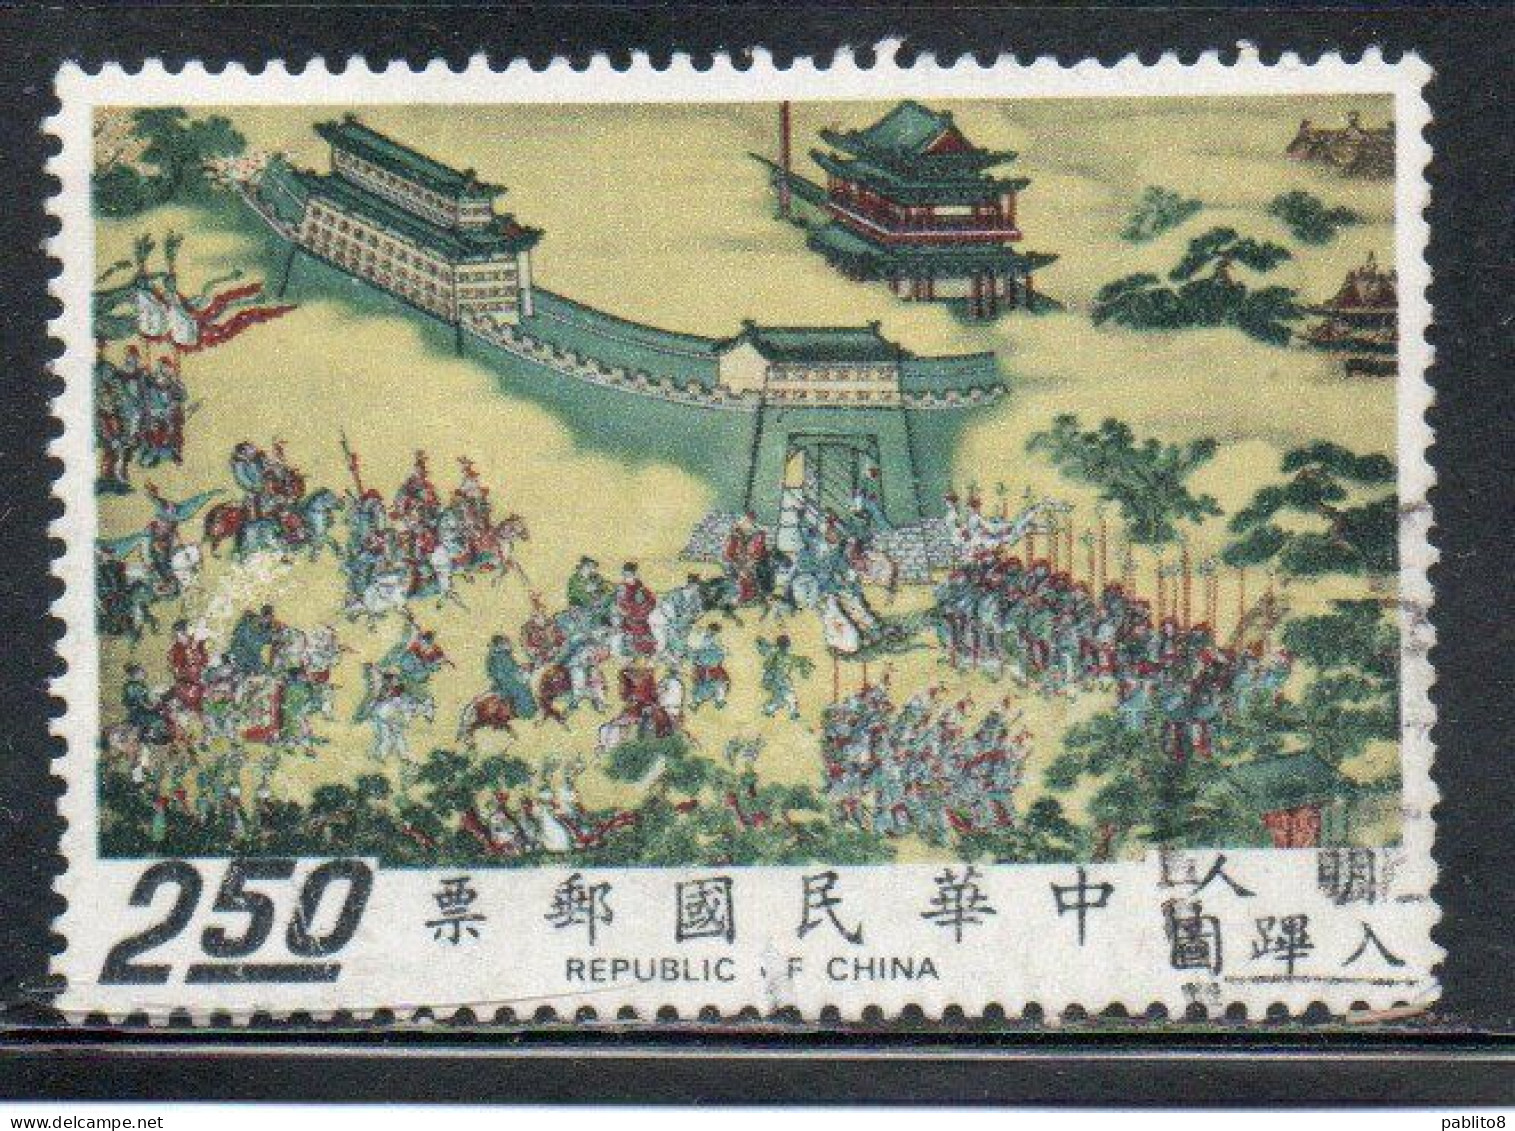 CHINA REPUBLIC CINA TAIWAN FORMOSA 1972 SCROLLS DEPICTING EMPEROR SHIH-TSUNG'S 2.50$ USED USATO OBLITERE' - Used Stamps